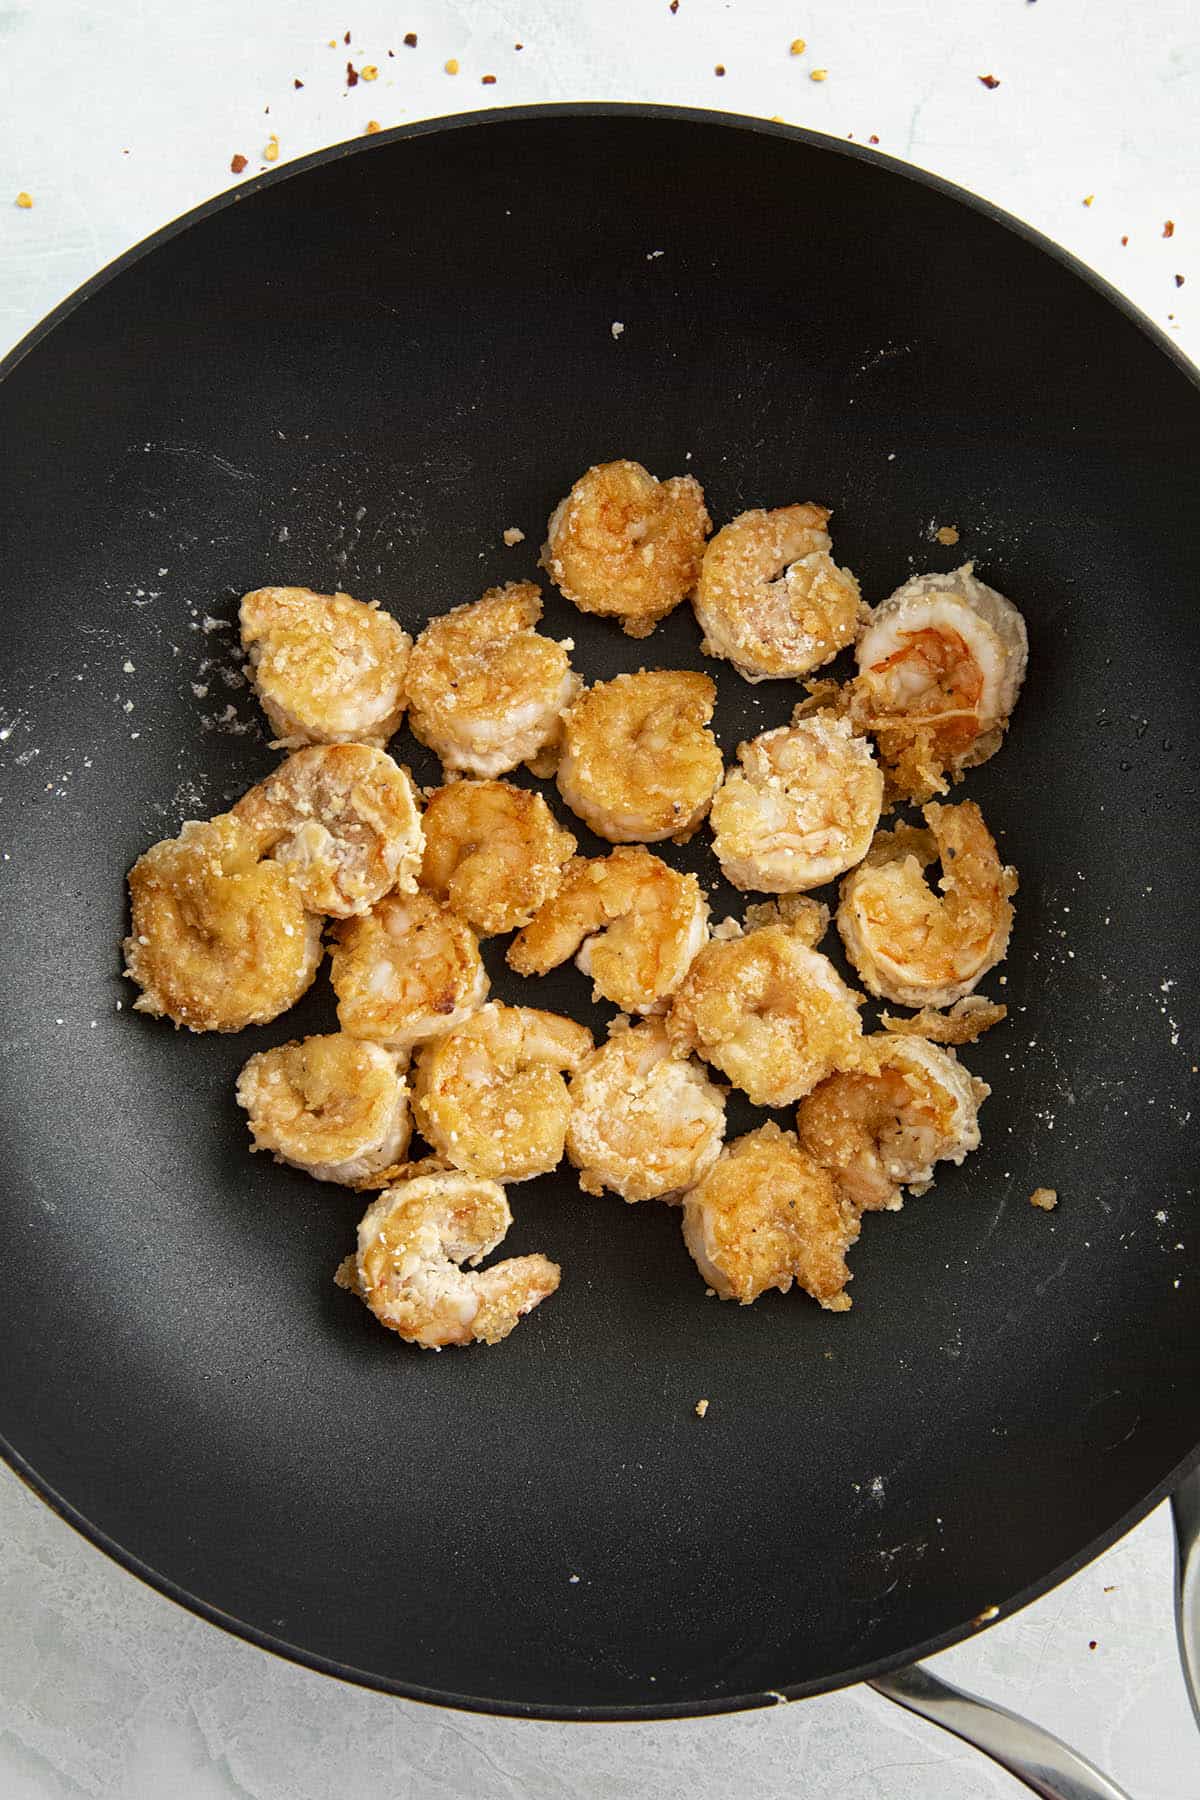 Cooking the shrimp in a hot pan